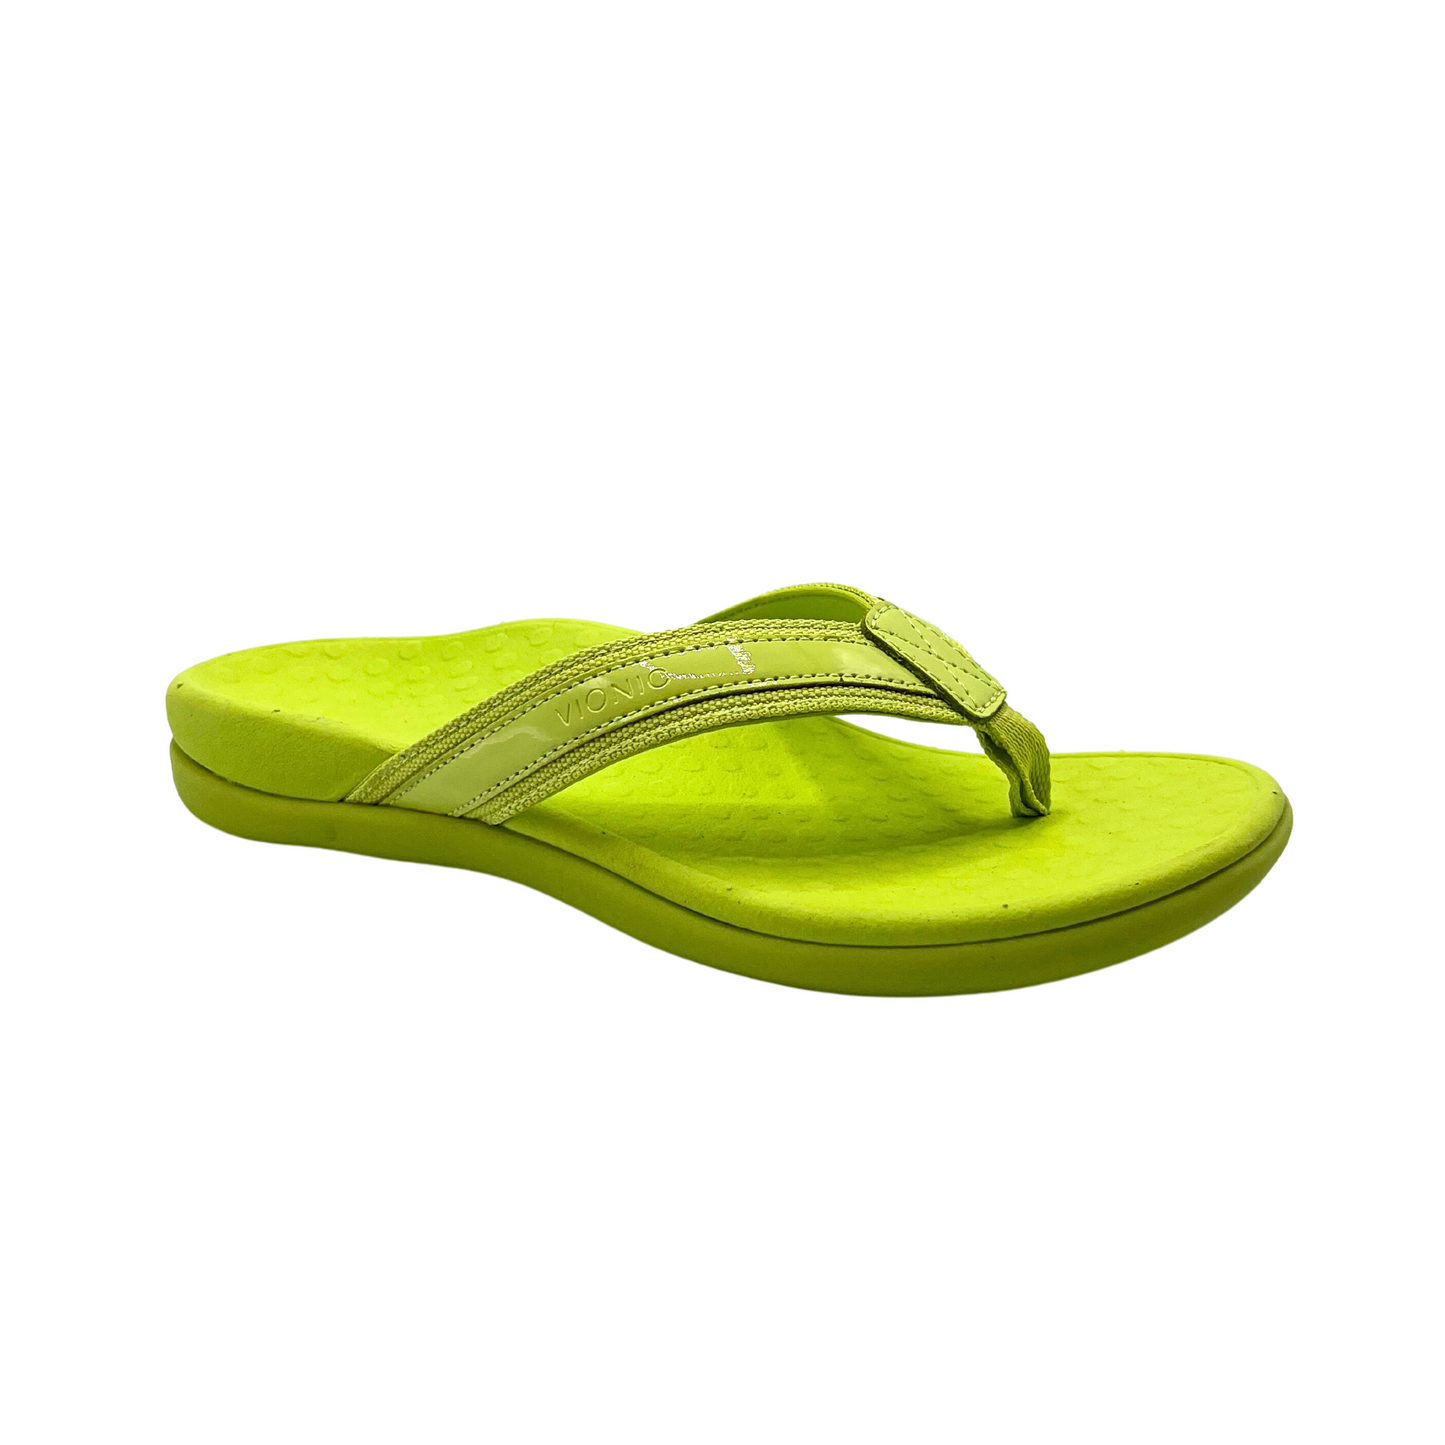 Angled side view of a flip flop sandal in a bright green.  Wide toe box and nicely contoured footbed